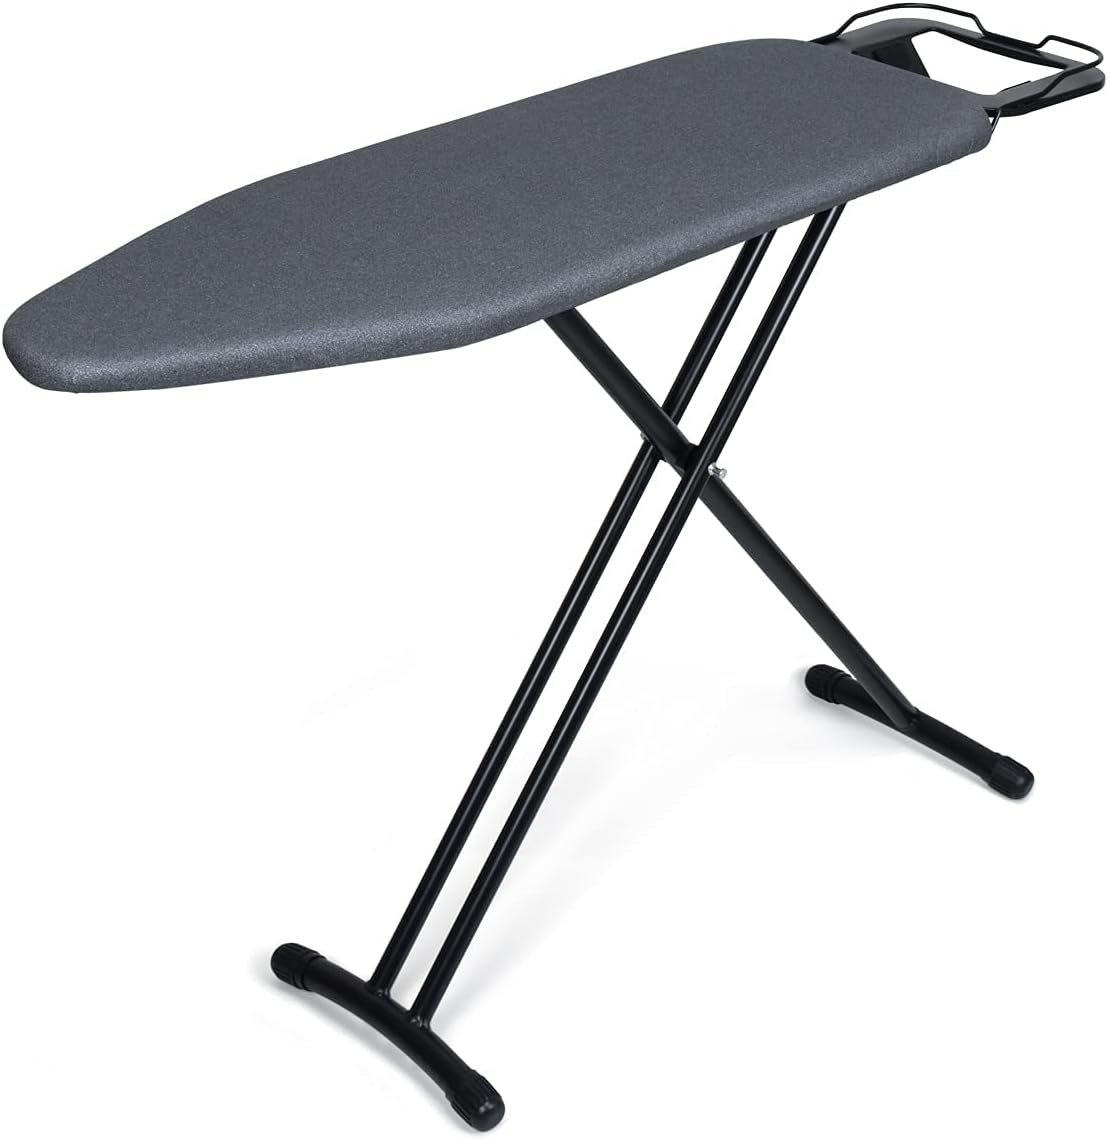 VIO Ironing Board with Heat Resistant Cover and Thicken Felt Pad, Heavy Sturdy Legs (BLACK)